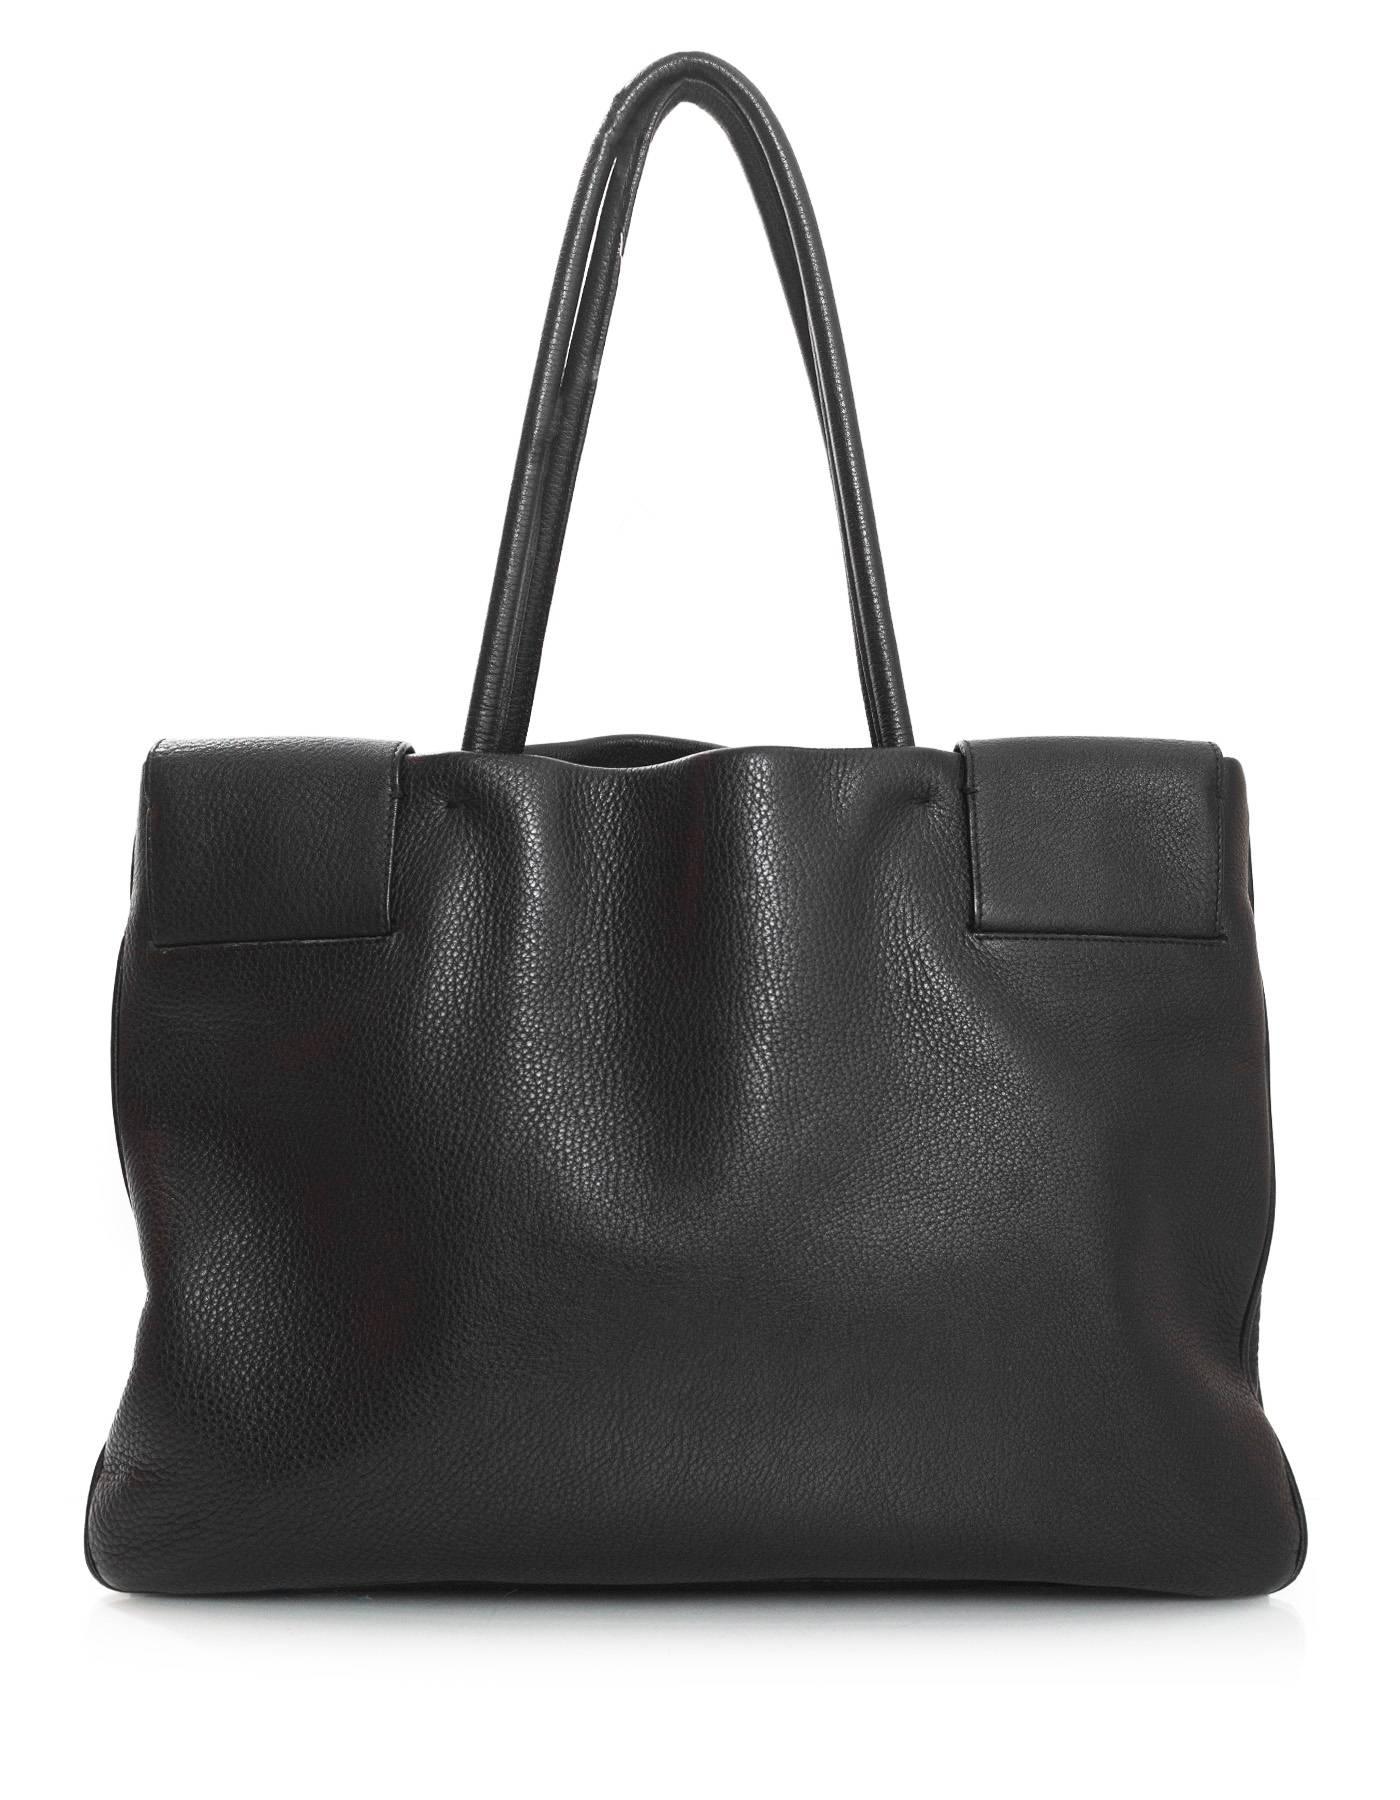 Prada Black Leather Tote Bag In Excellent Condition In New York, NY